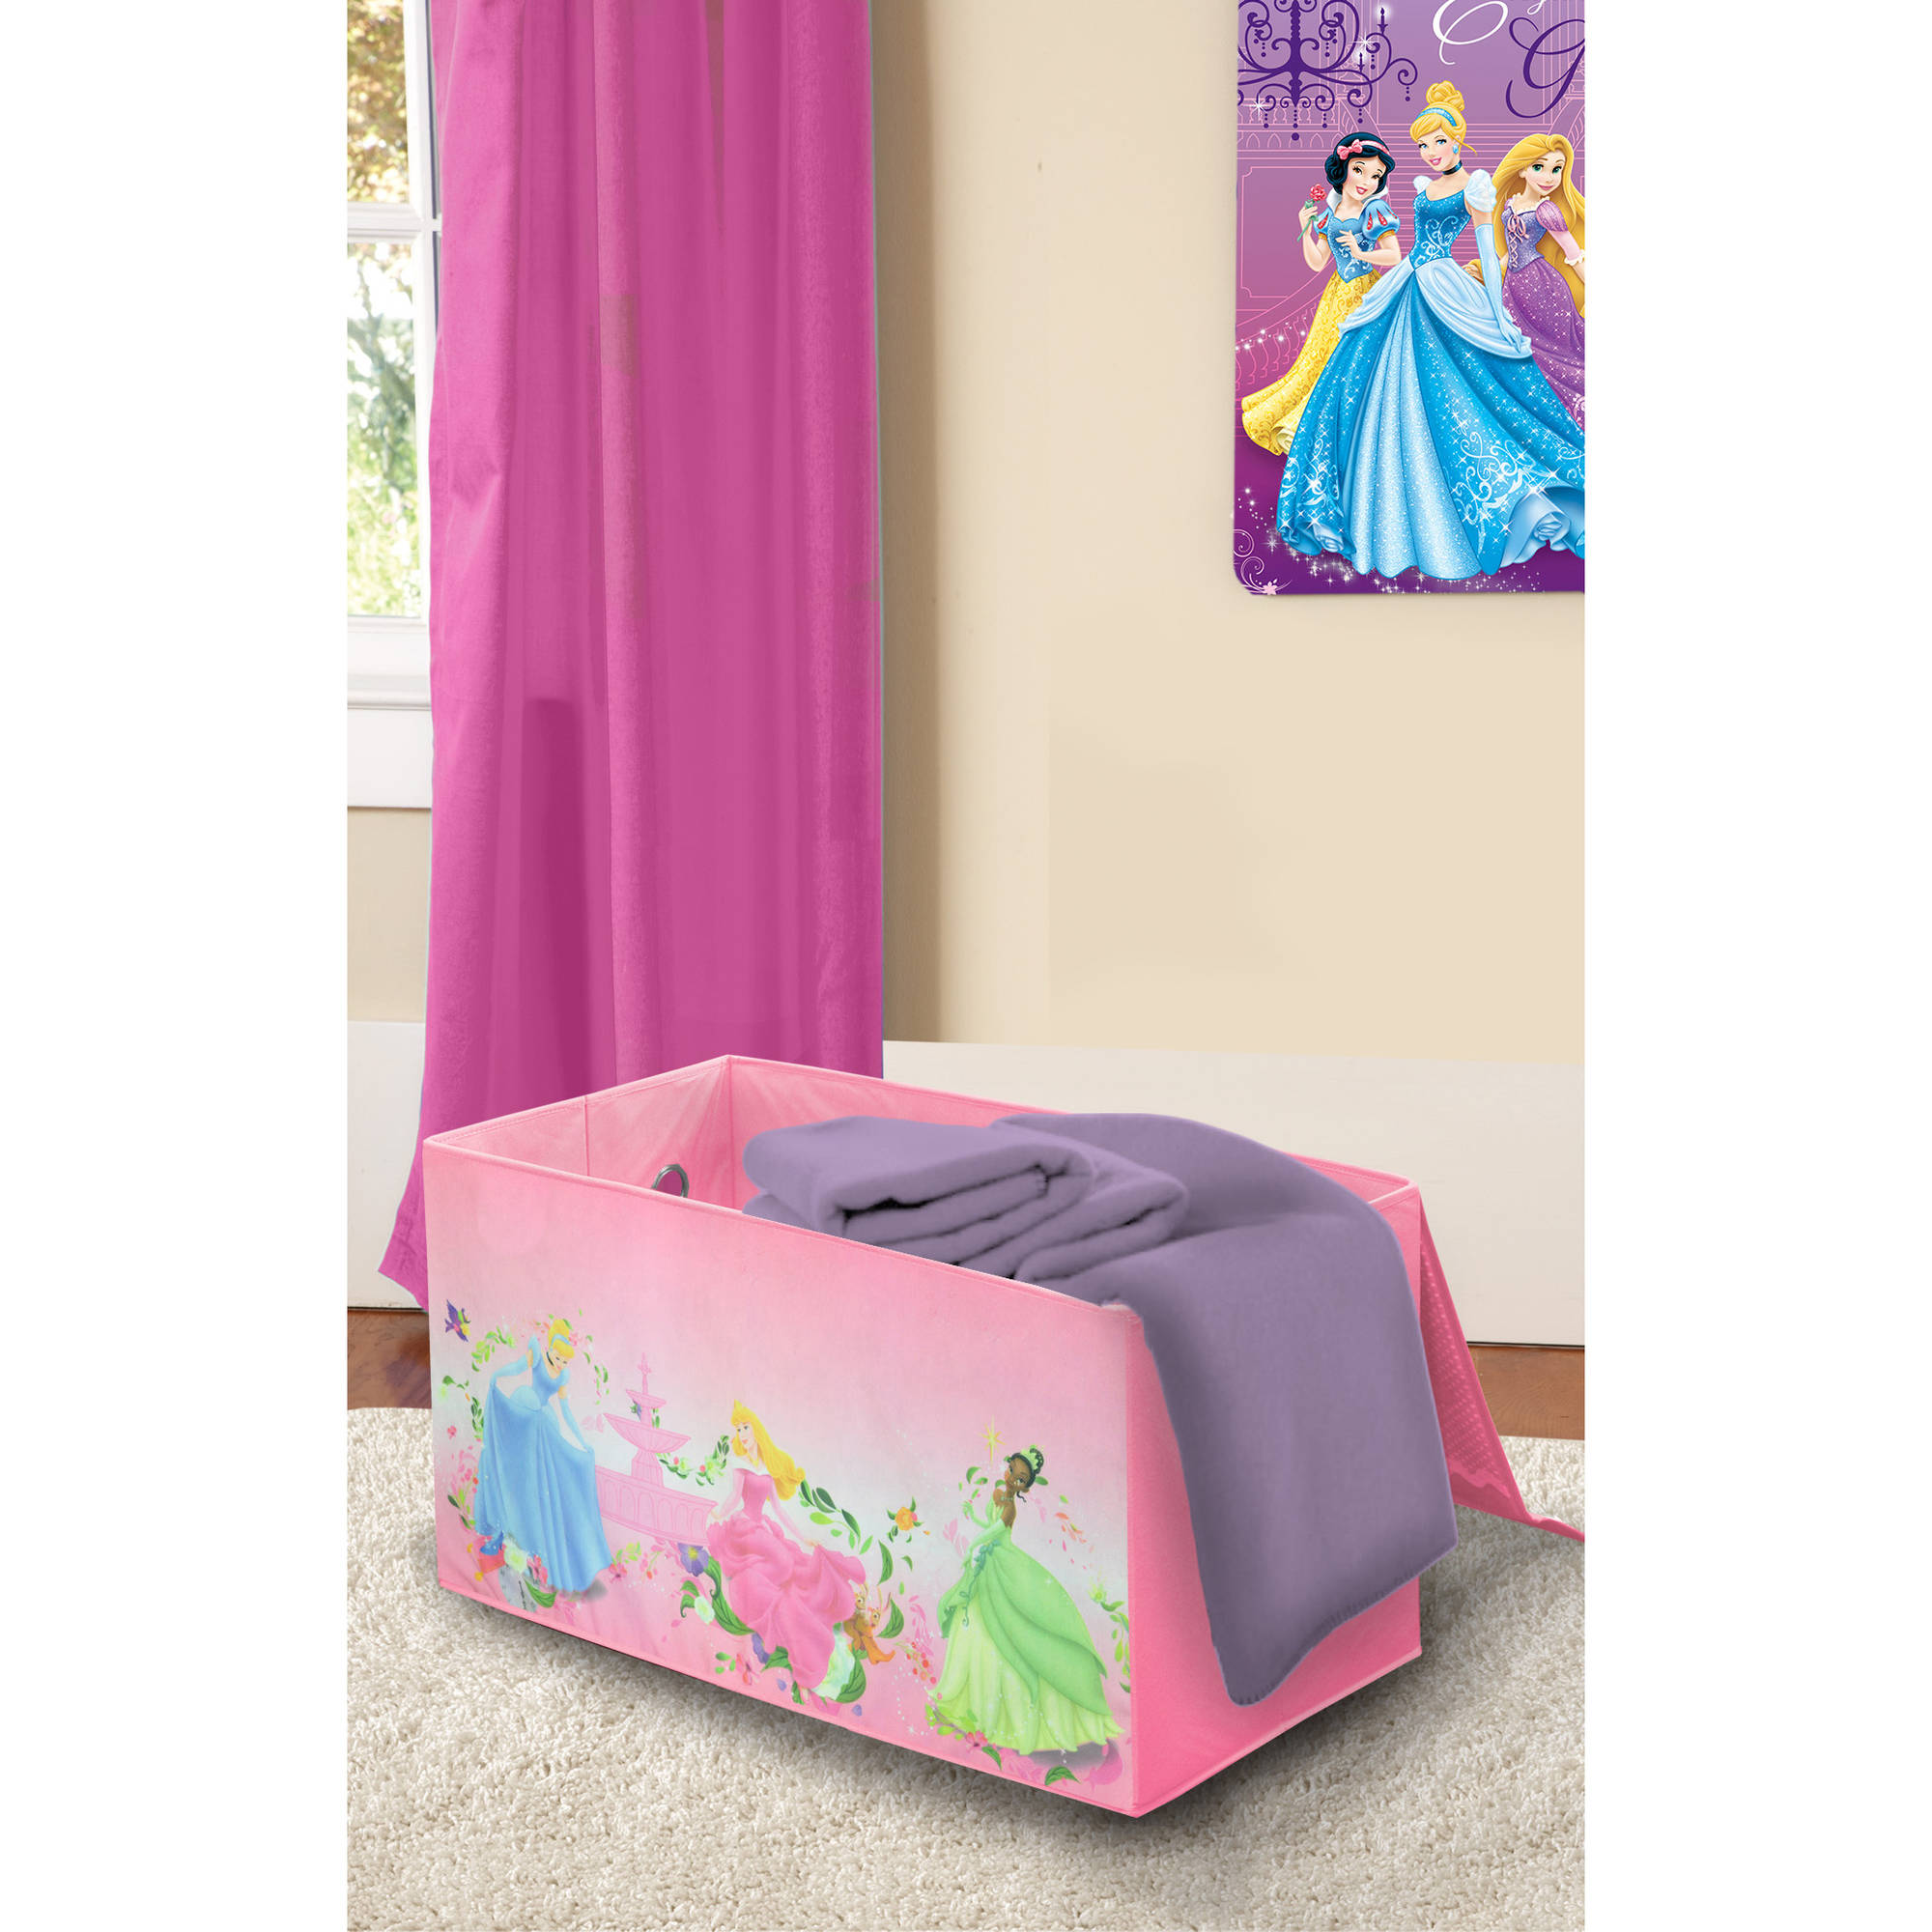 Disney Princess Oversized Soft Pink Canvas Collapsible Storage Toy Trunk for Kids - image 1 of 5